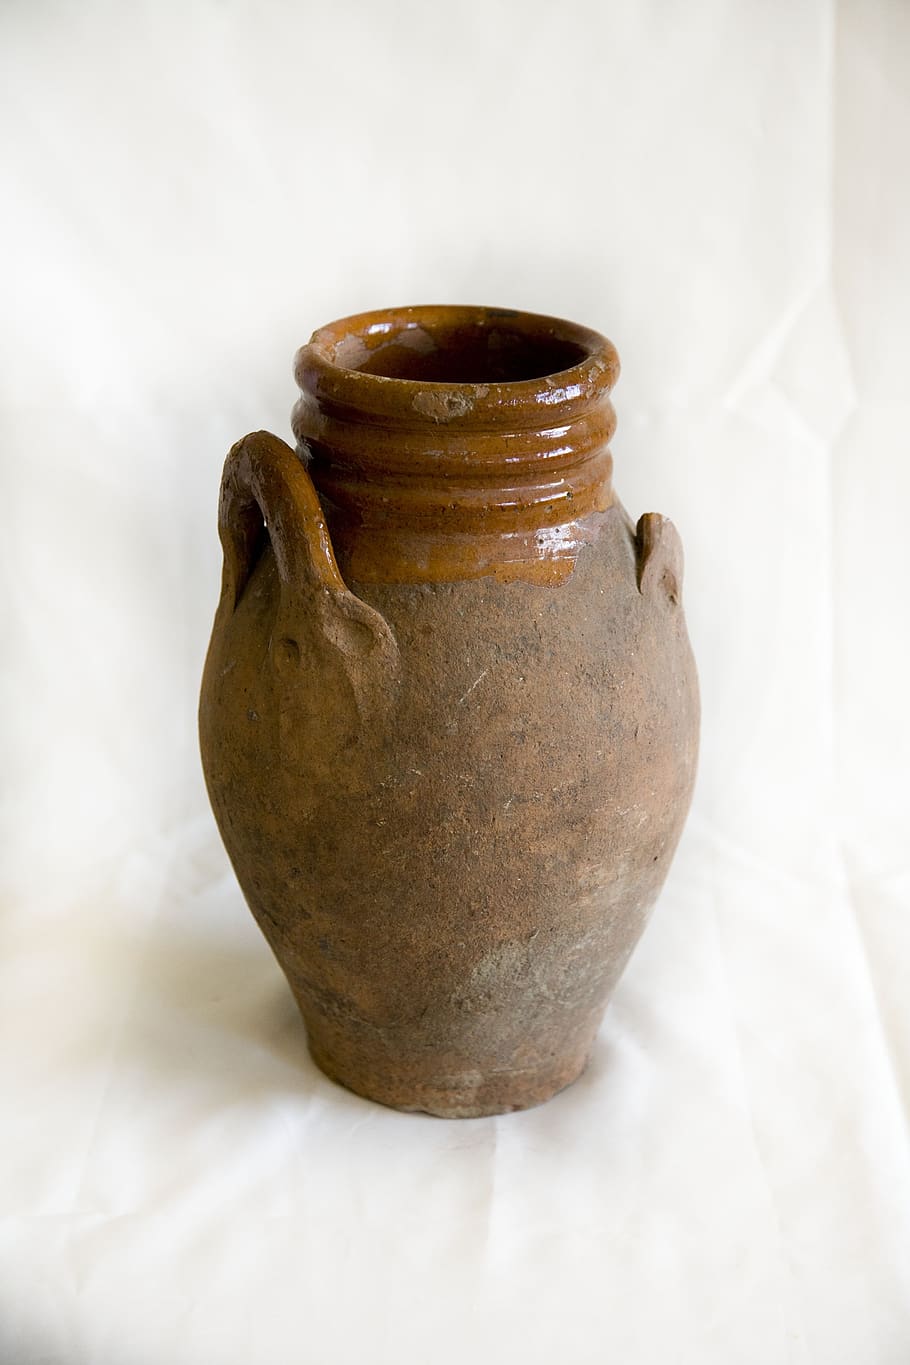 test, pot, ceramic, jugs, traditional, terry, vase, pottery, indoors, craft